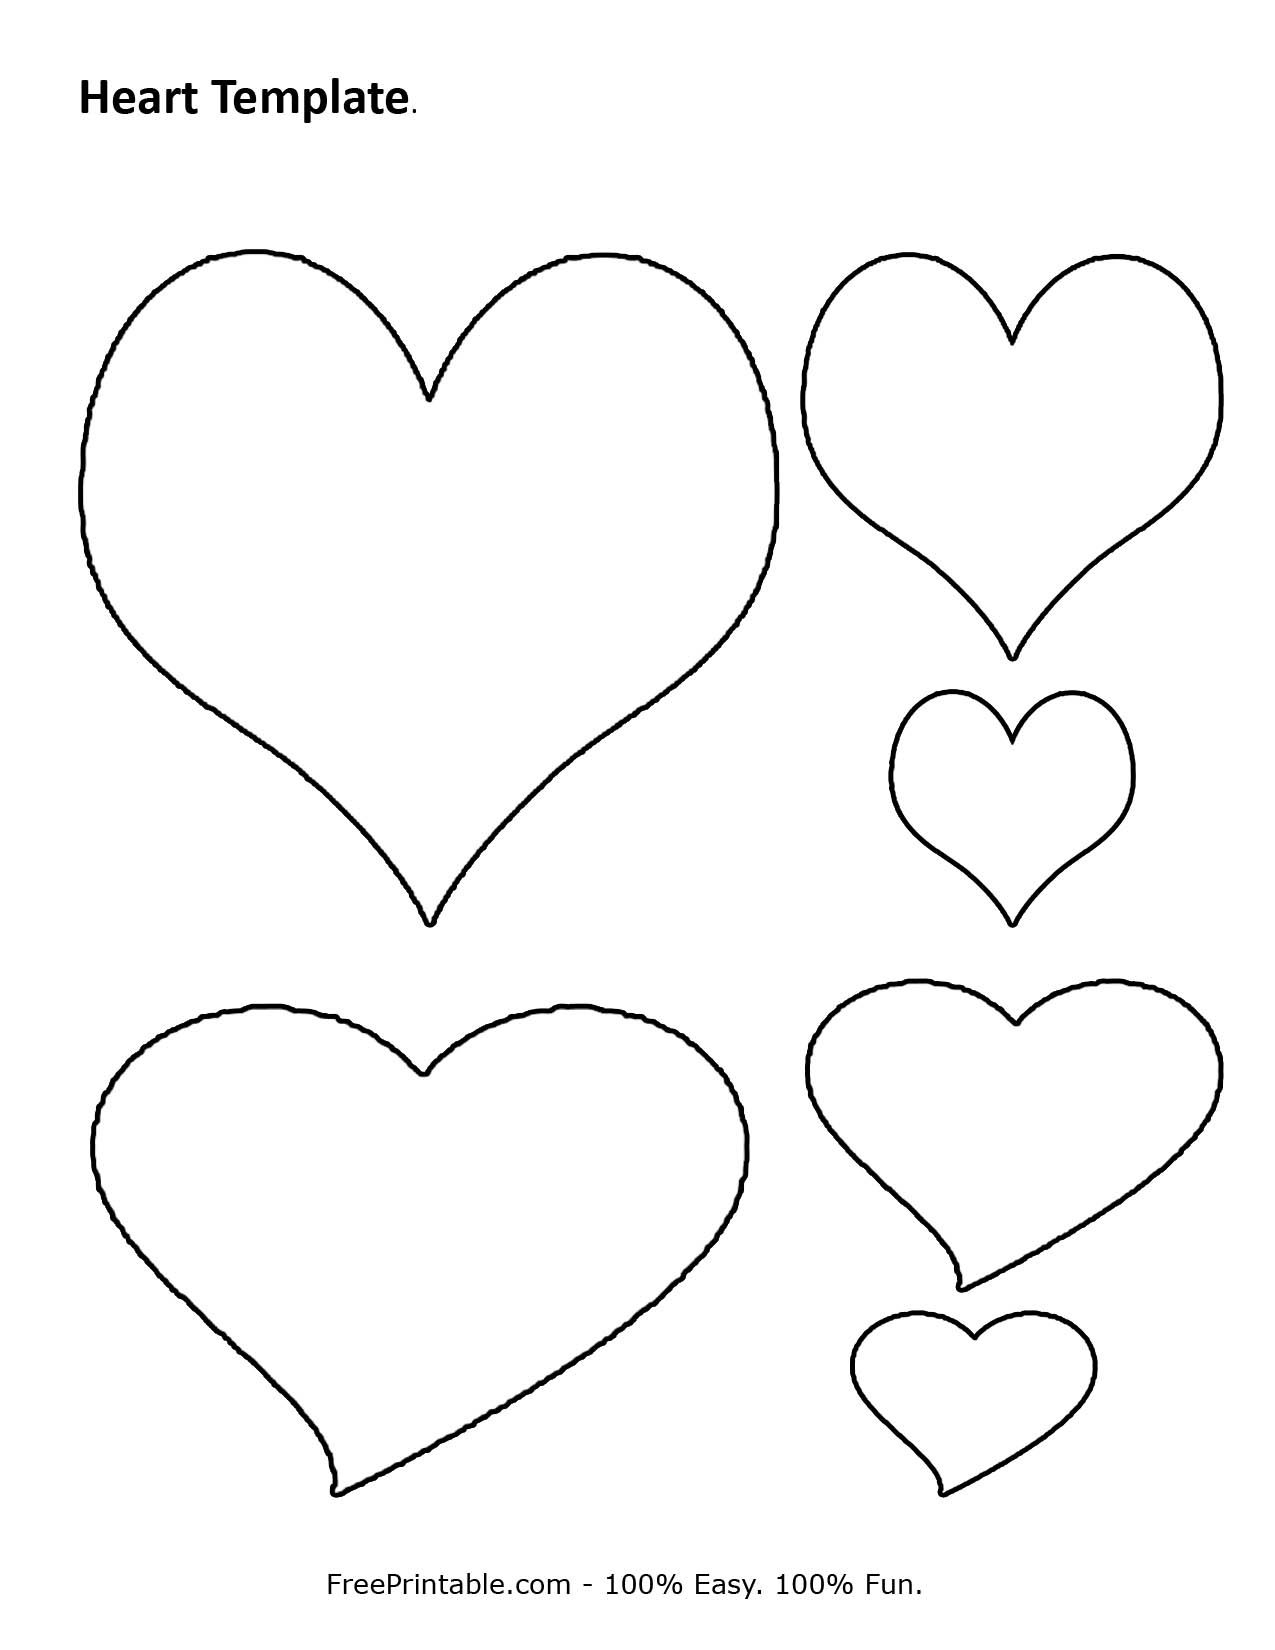 Free Printable Heart Template | Cupid Has A Heart On | Pinterest - Free Printable Heart Designs